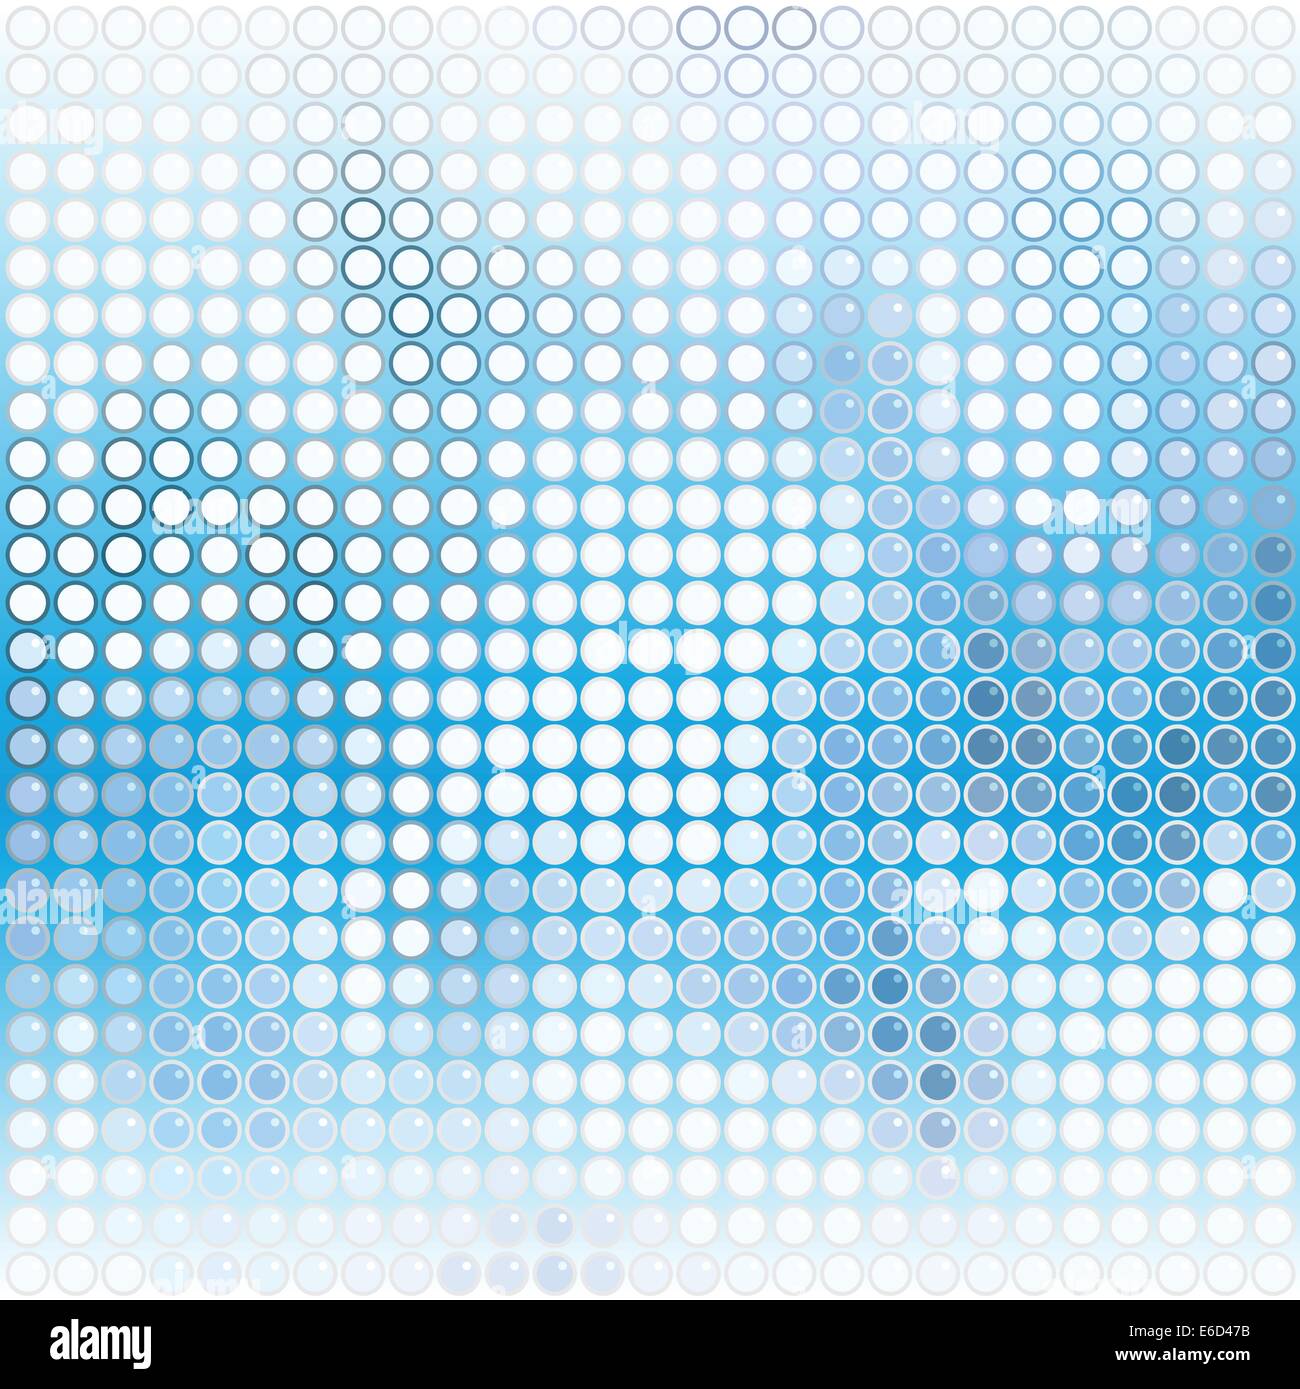 Abstract vector background of blue and white circles Stock Vector